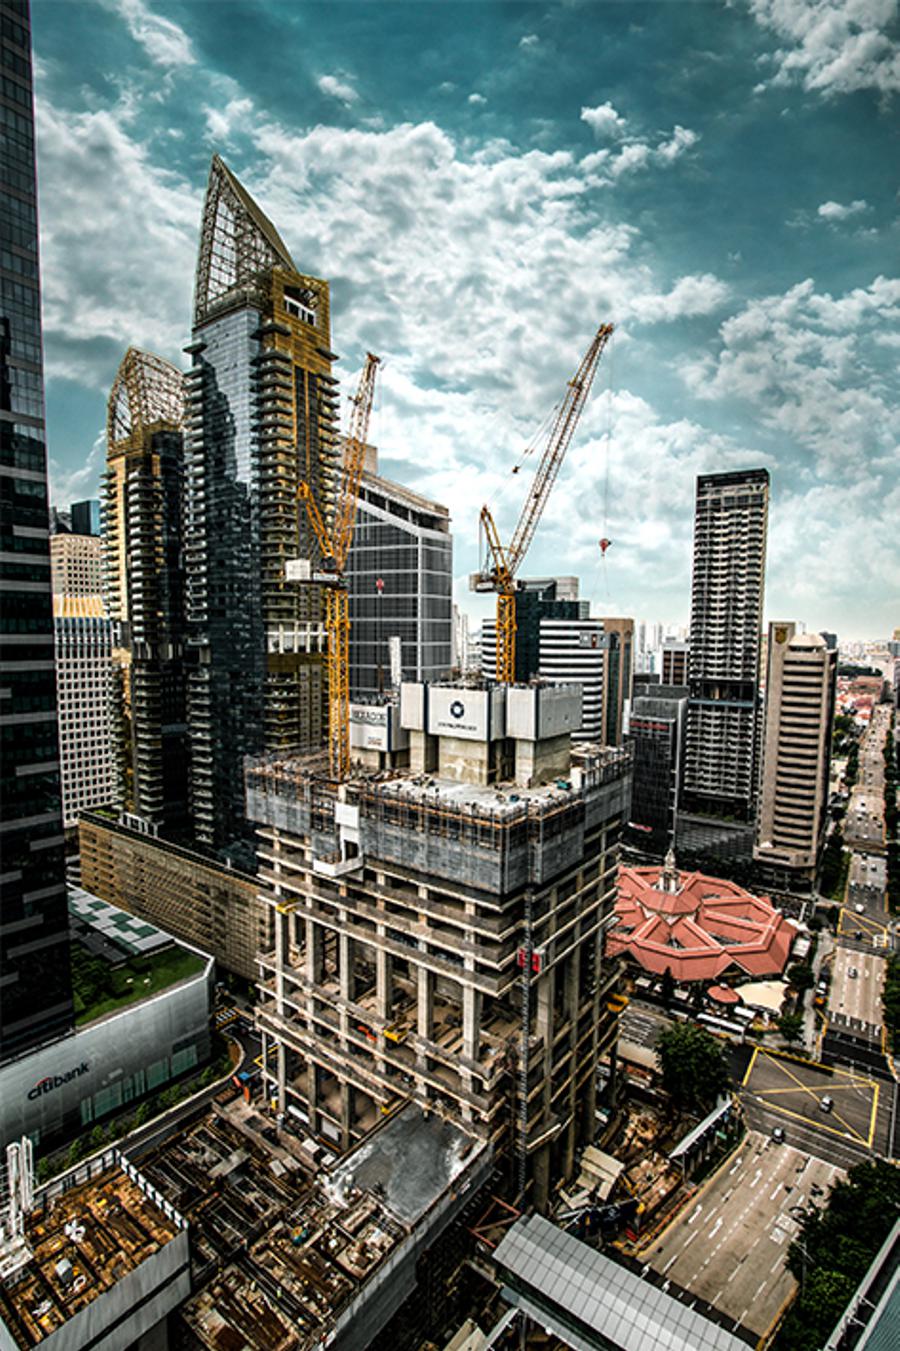 Two Liebherr luffing jib cranes are currently working on the construction of one of the two towers of the Central Boulevard Towers in Singapore.